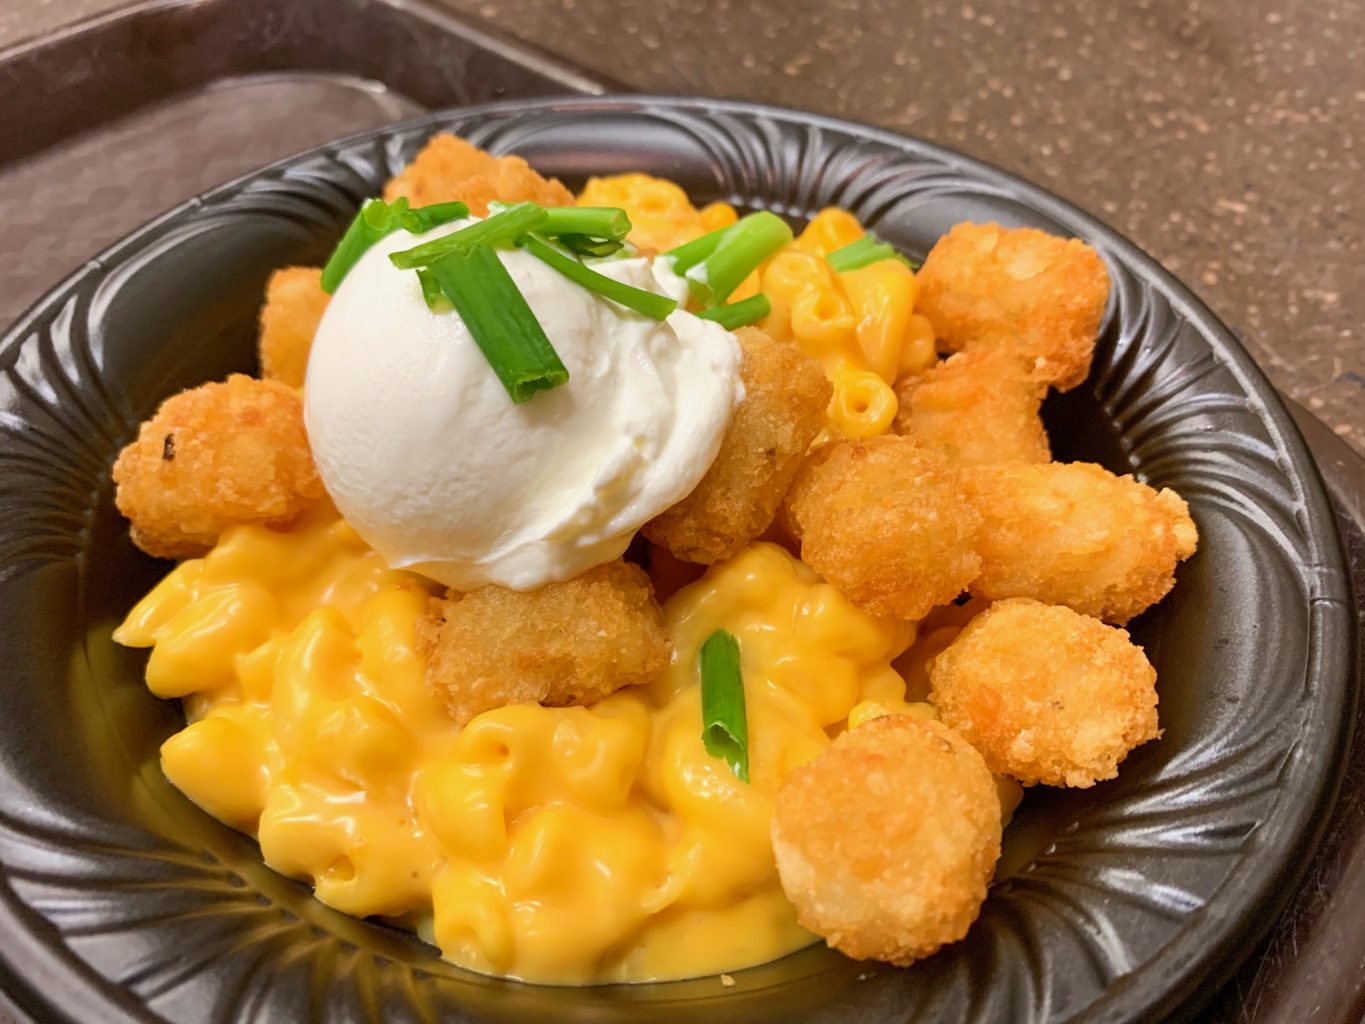 Macaroni Cheese available from Friar Nook, a Magic Kingdom quick service restaurant